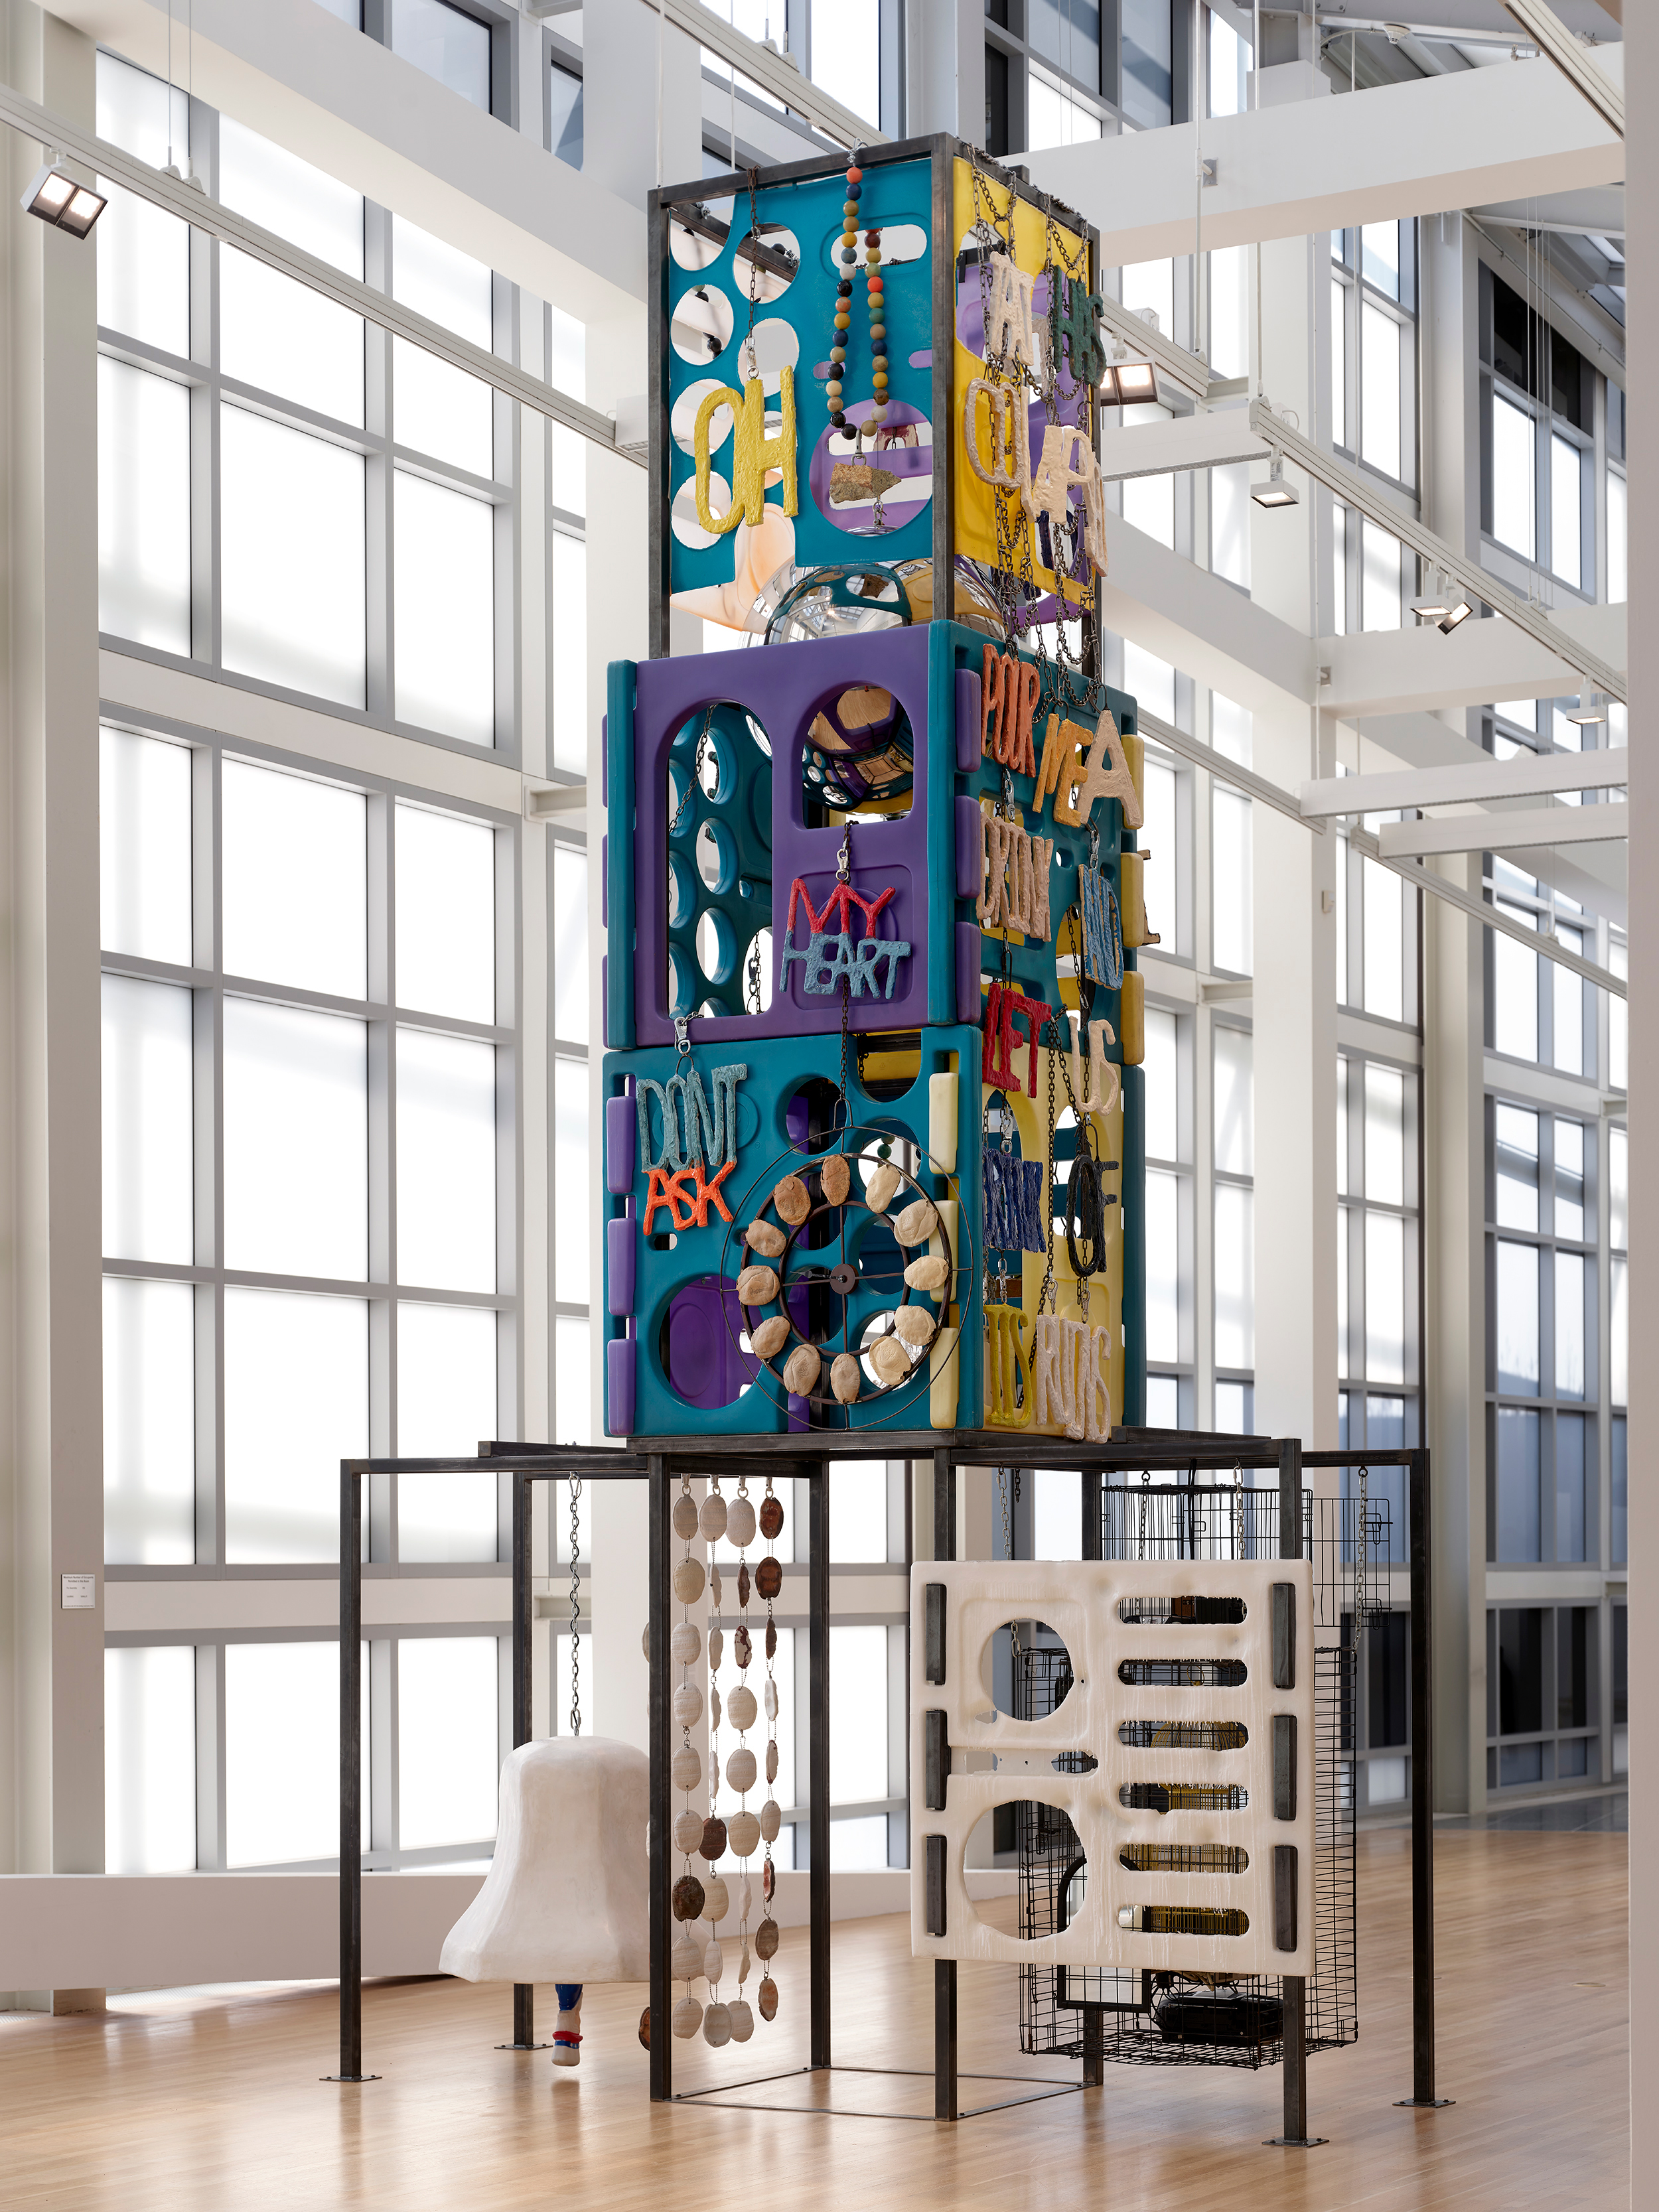 Upright, four-tier multicolored sculpture with ornaments, including text, beads, cages with radios, and ceramic bell with ceramic pita curtain.